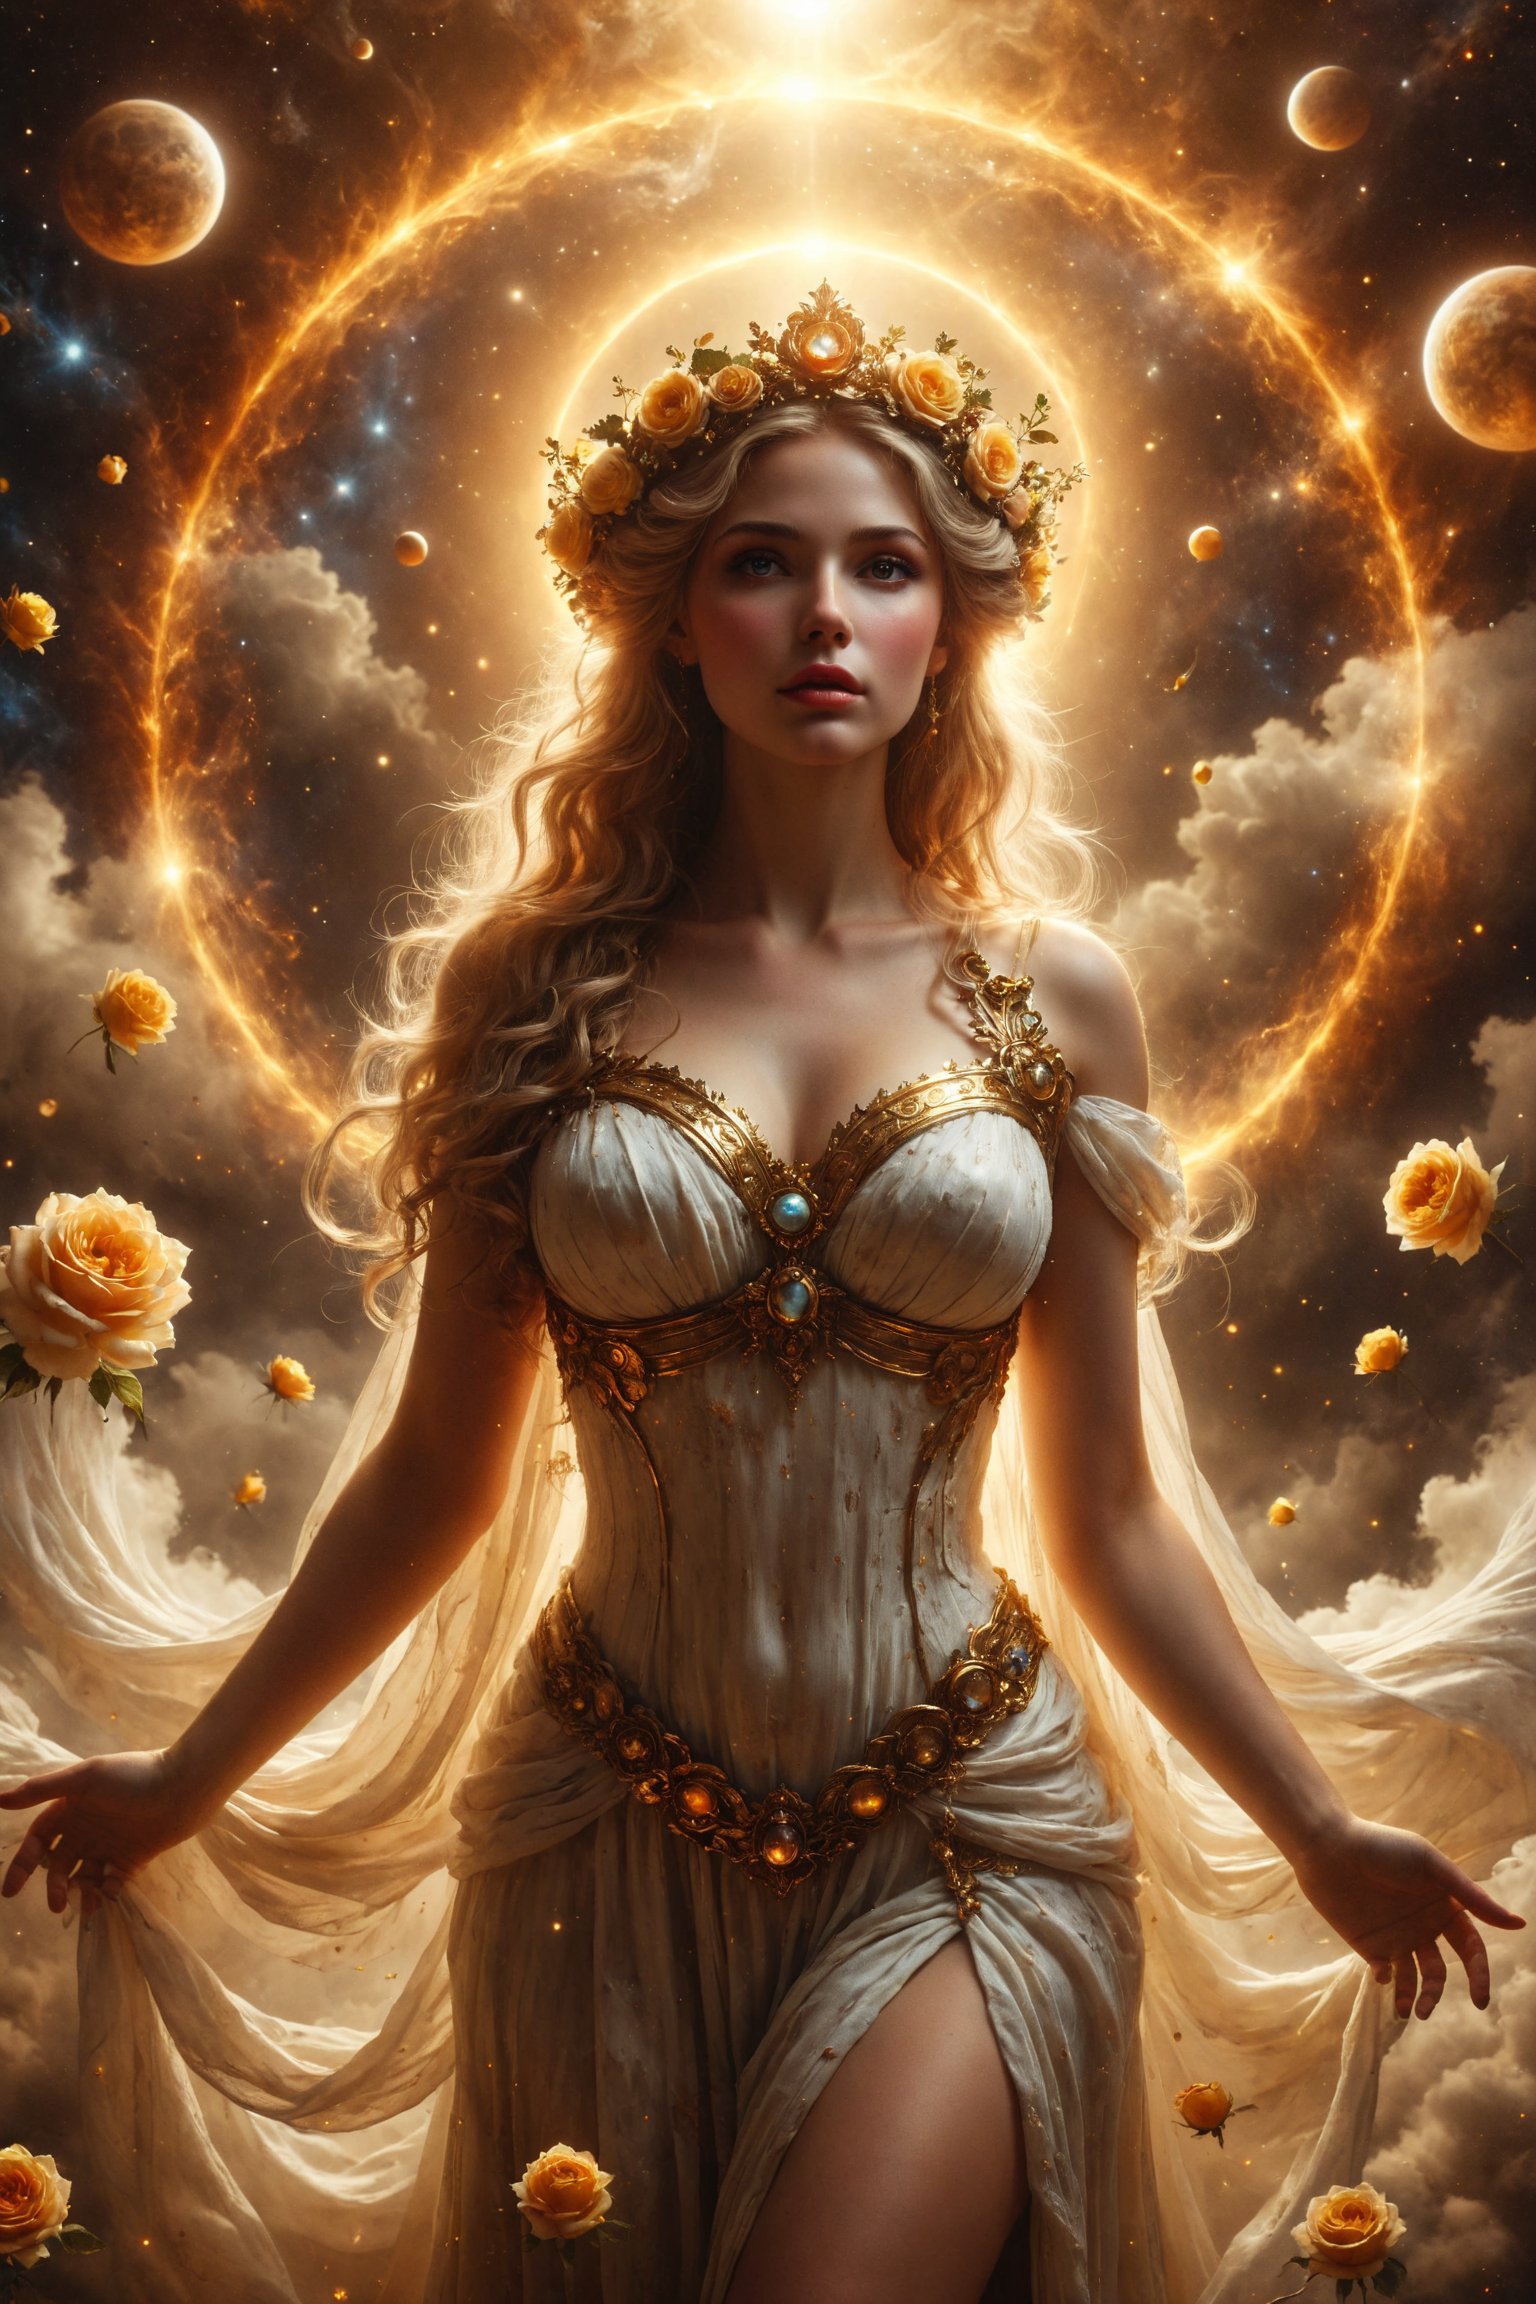 Queen of venus Aphrodite full body with his planet in the background, is a goddess of radiant beauty, surrounded by a golden halo. Her presence is intense and bright, symbolizing Venus' thick and hot atmosphere, Beautiful and radiant, with glowing skin and a golden aura. He carries with him a crown of roses and wears a dress that appears to be made of glowing clouds. His presence radiates love and warmth.